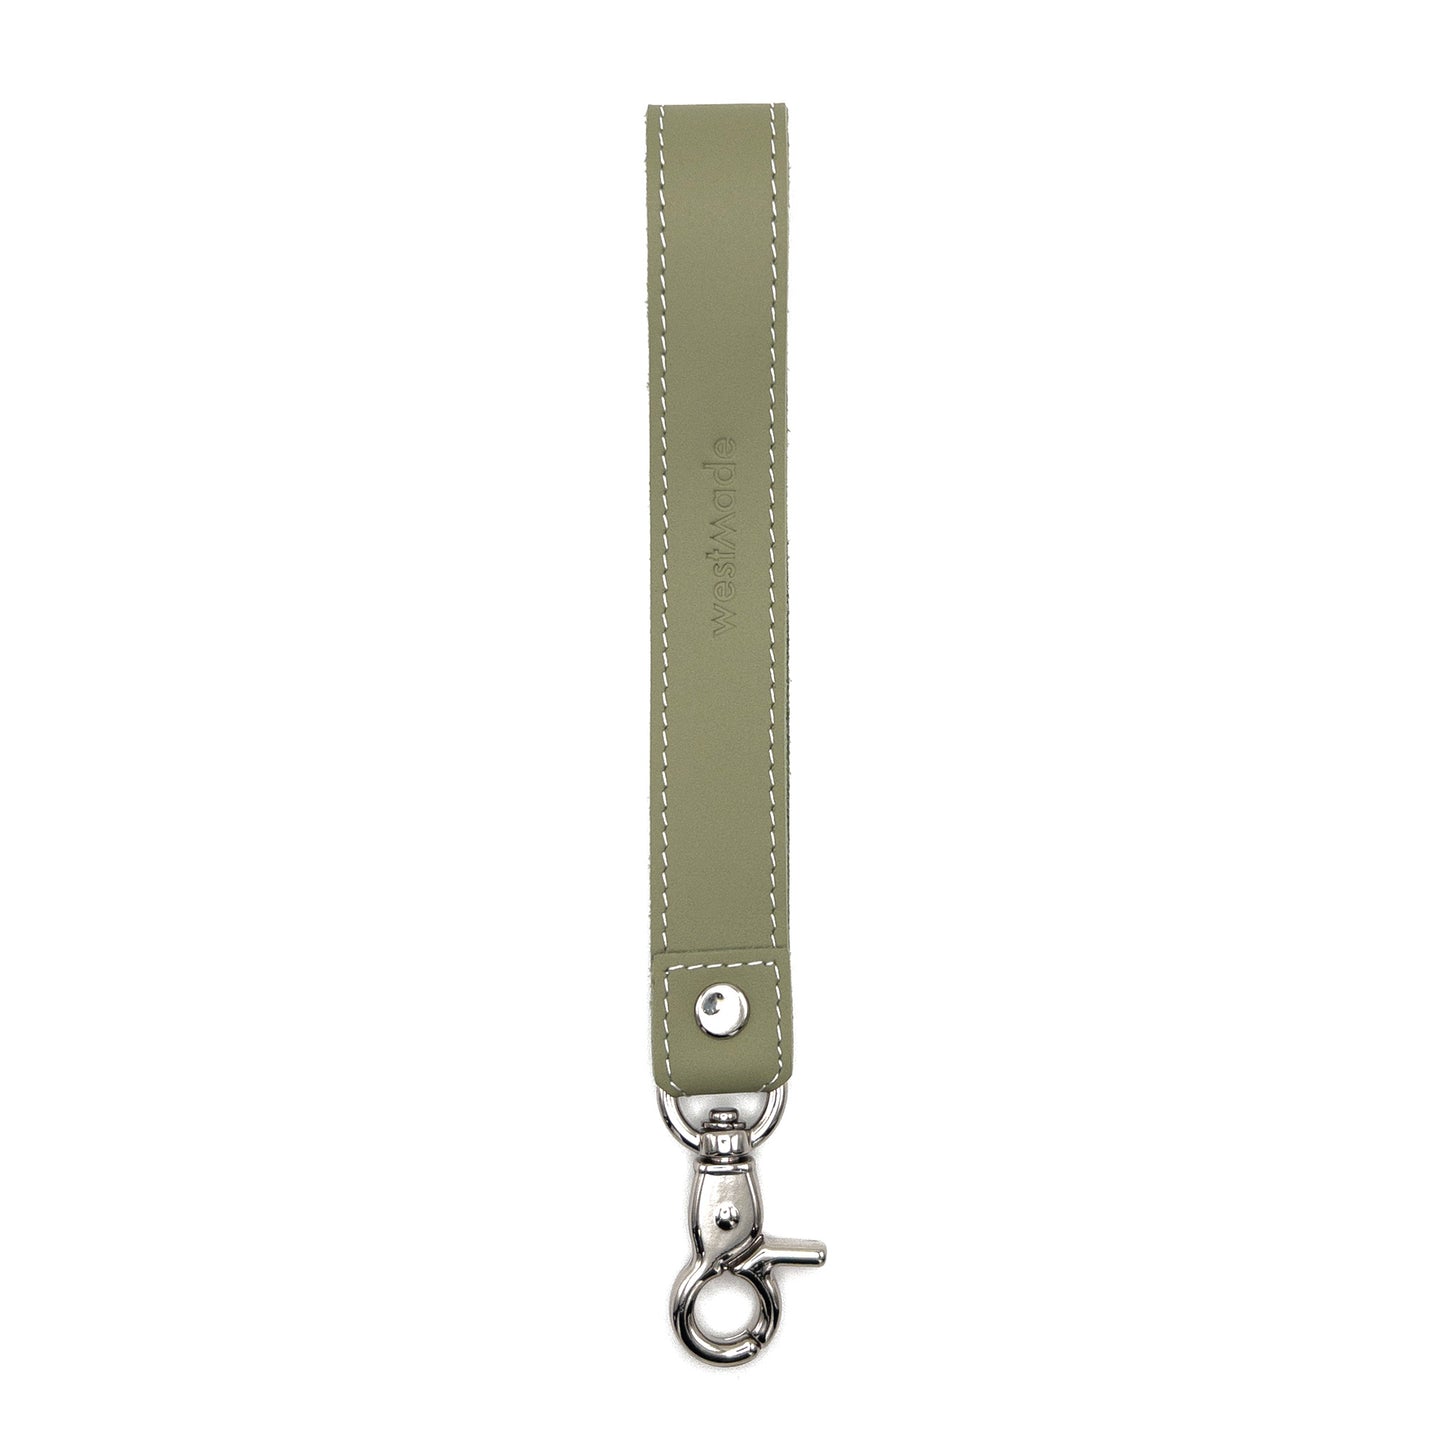 Westmade Mayfield Mini Minimalist Keychain Wallet with Wristlet Tether Mossy Green/Cream